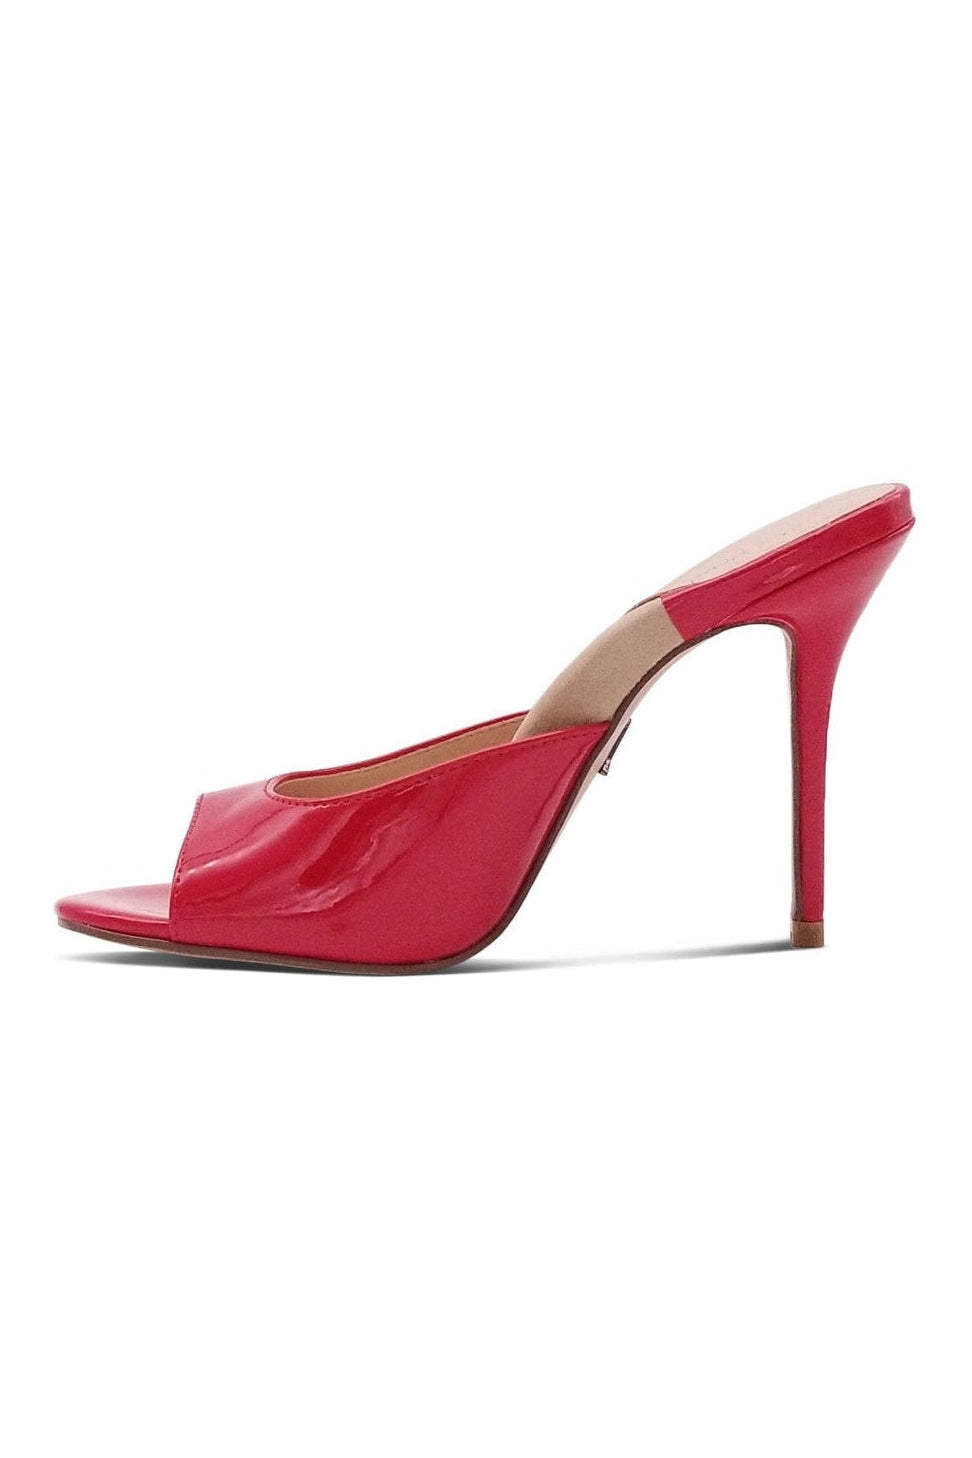 Micro Stiletto Sexy Mule-Slides-Sexyshoes Signature-Red-SEXYSHOES.COM